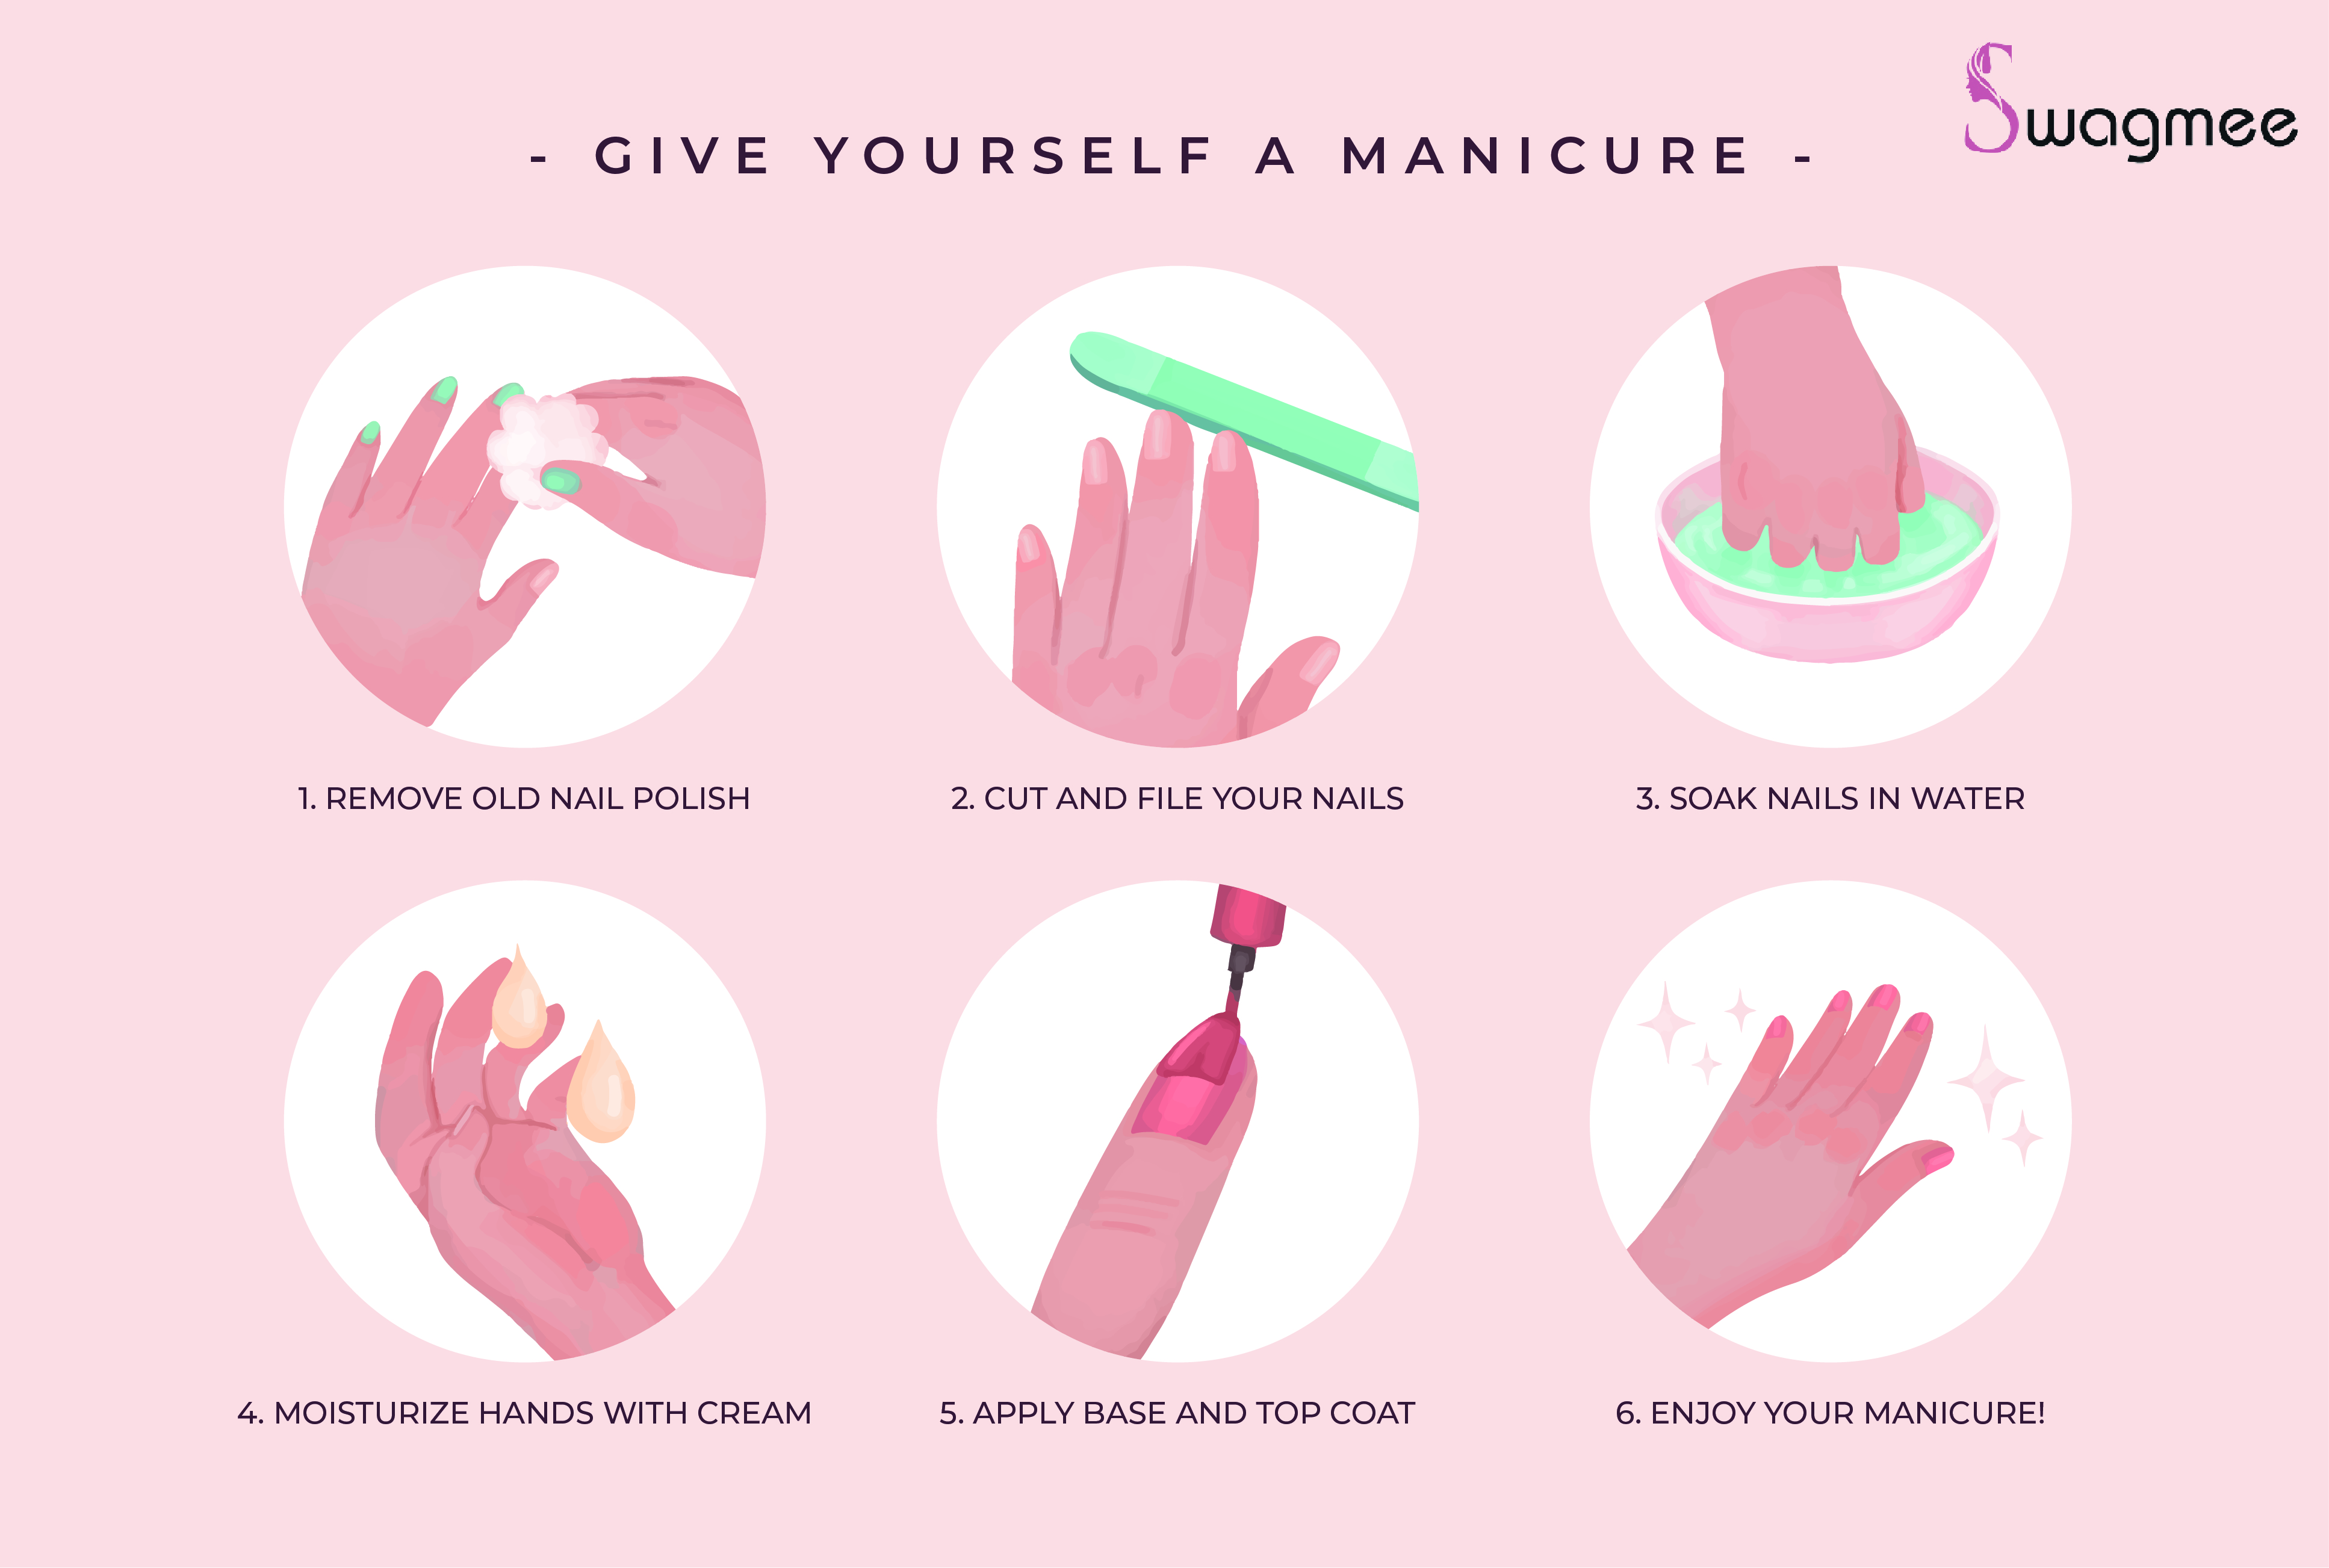 Top Safety Tips for Doing a Pedicure at Home